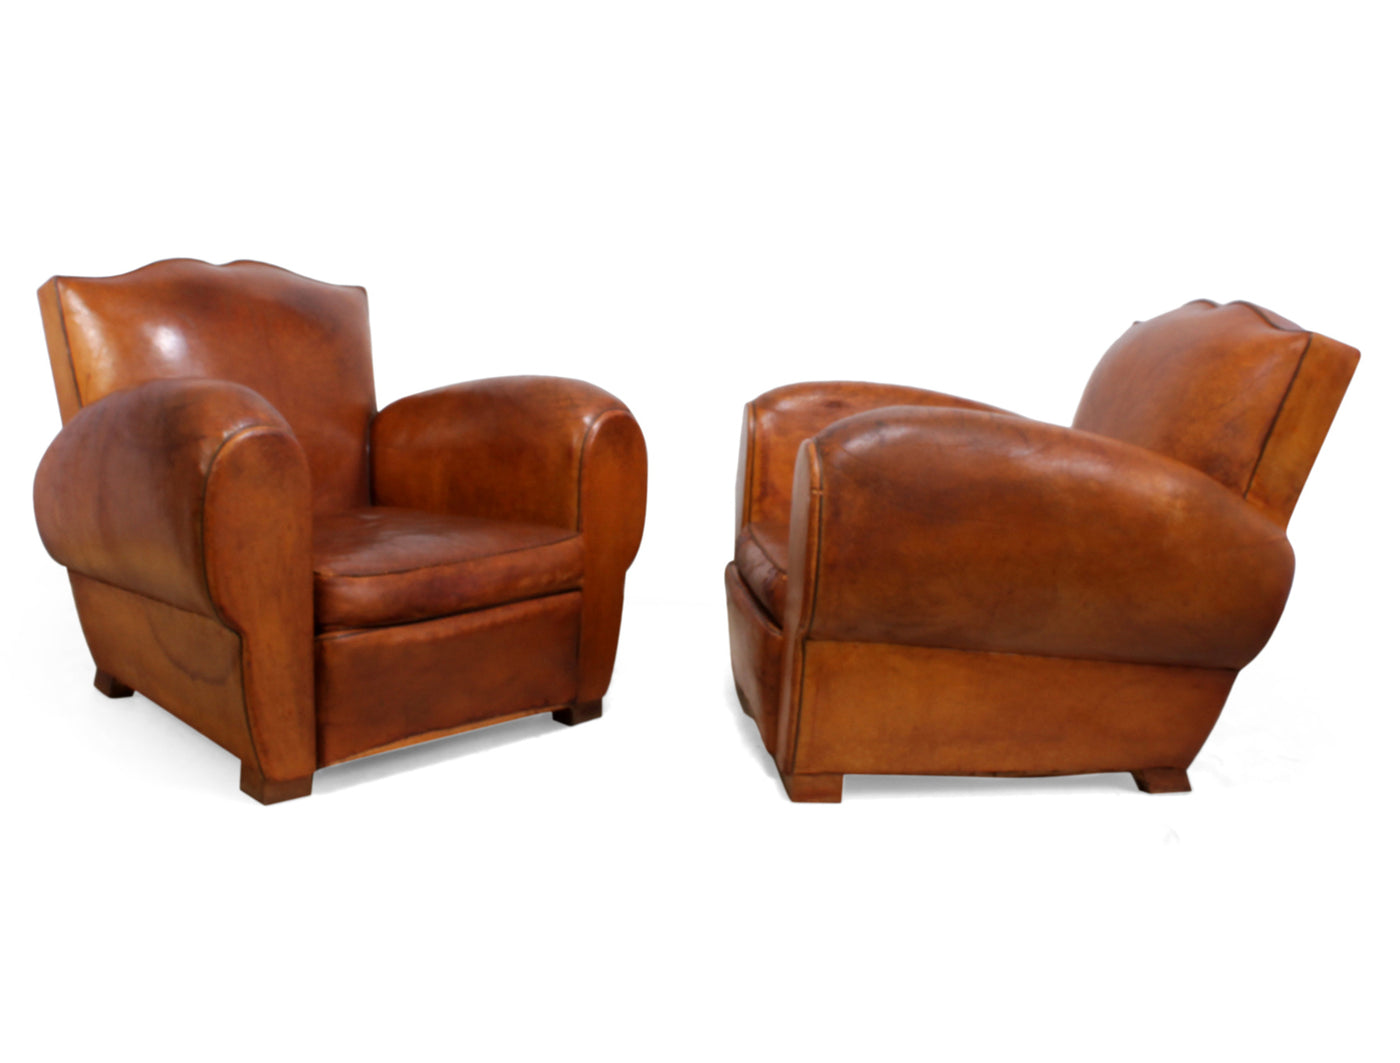 Pair of French Leather Club Chairs c1930